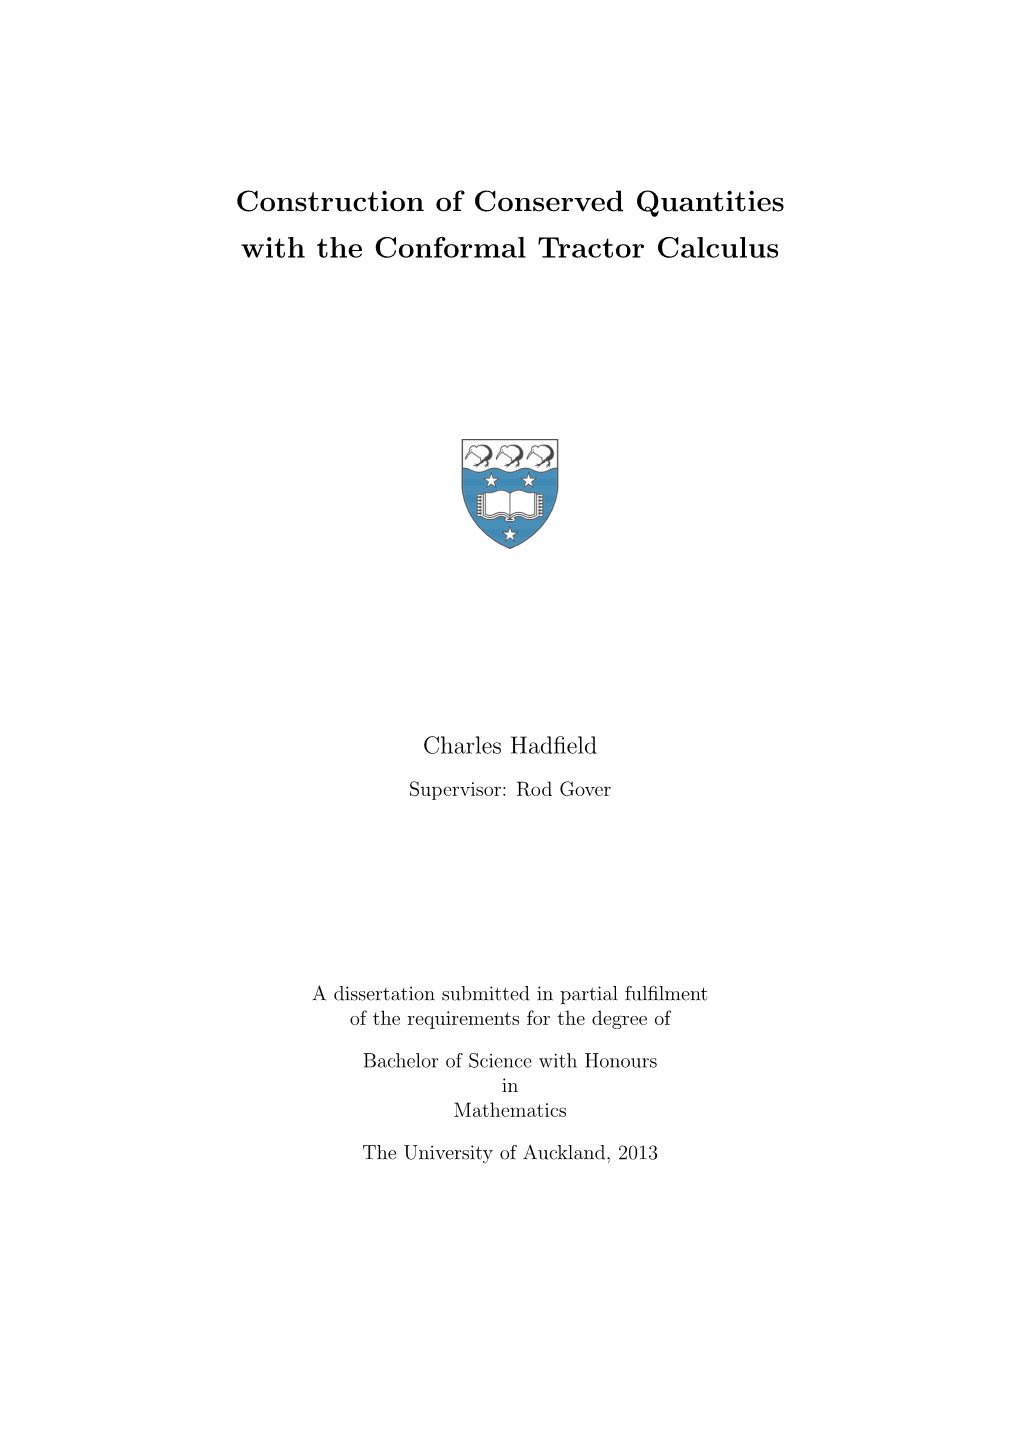 Dissertation Submitted in Partial Fulﬁlment of the Requirements for the Degree Of